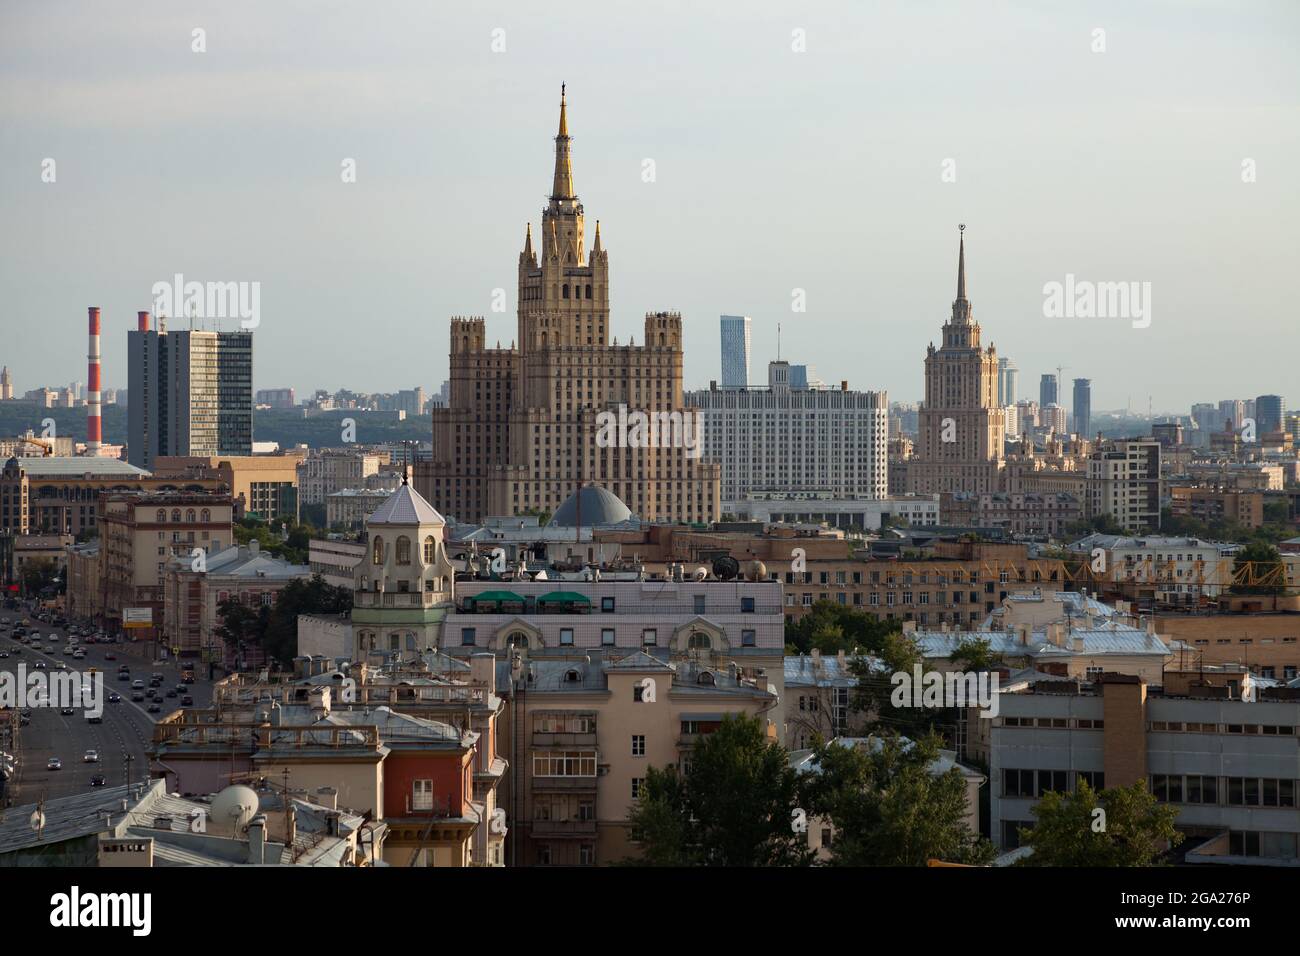 Two Stalinist skyscrapers and White House of Russia. Moscow. Panorama view of city on the blue sky with light haze or smog. Stock Photo